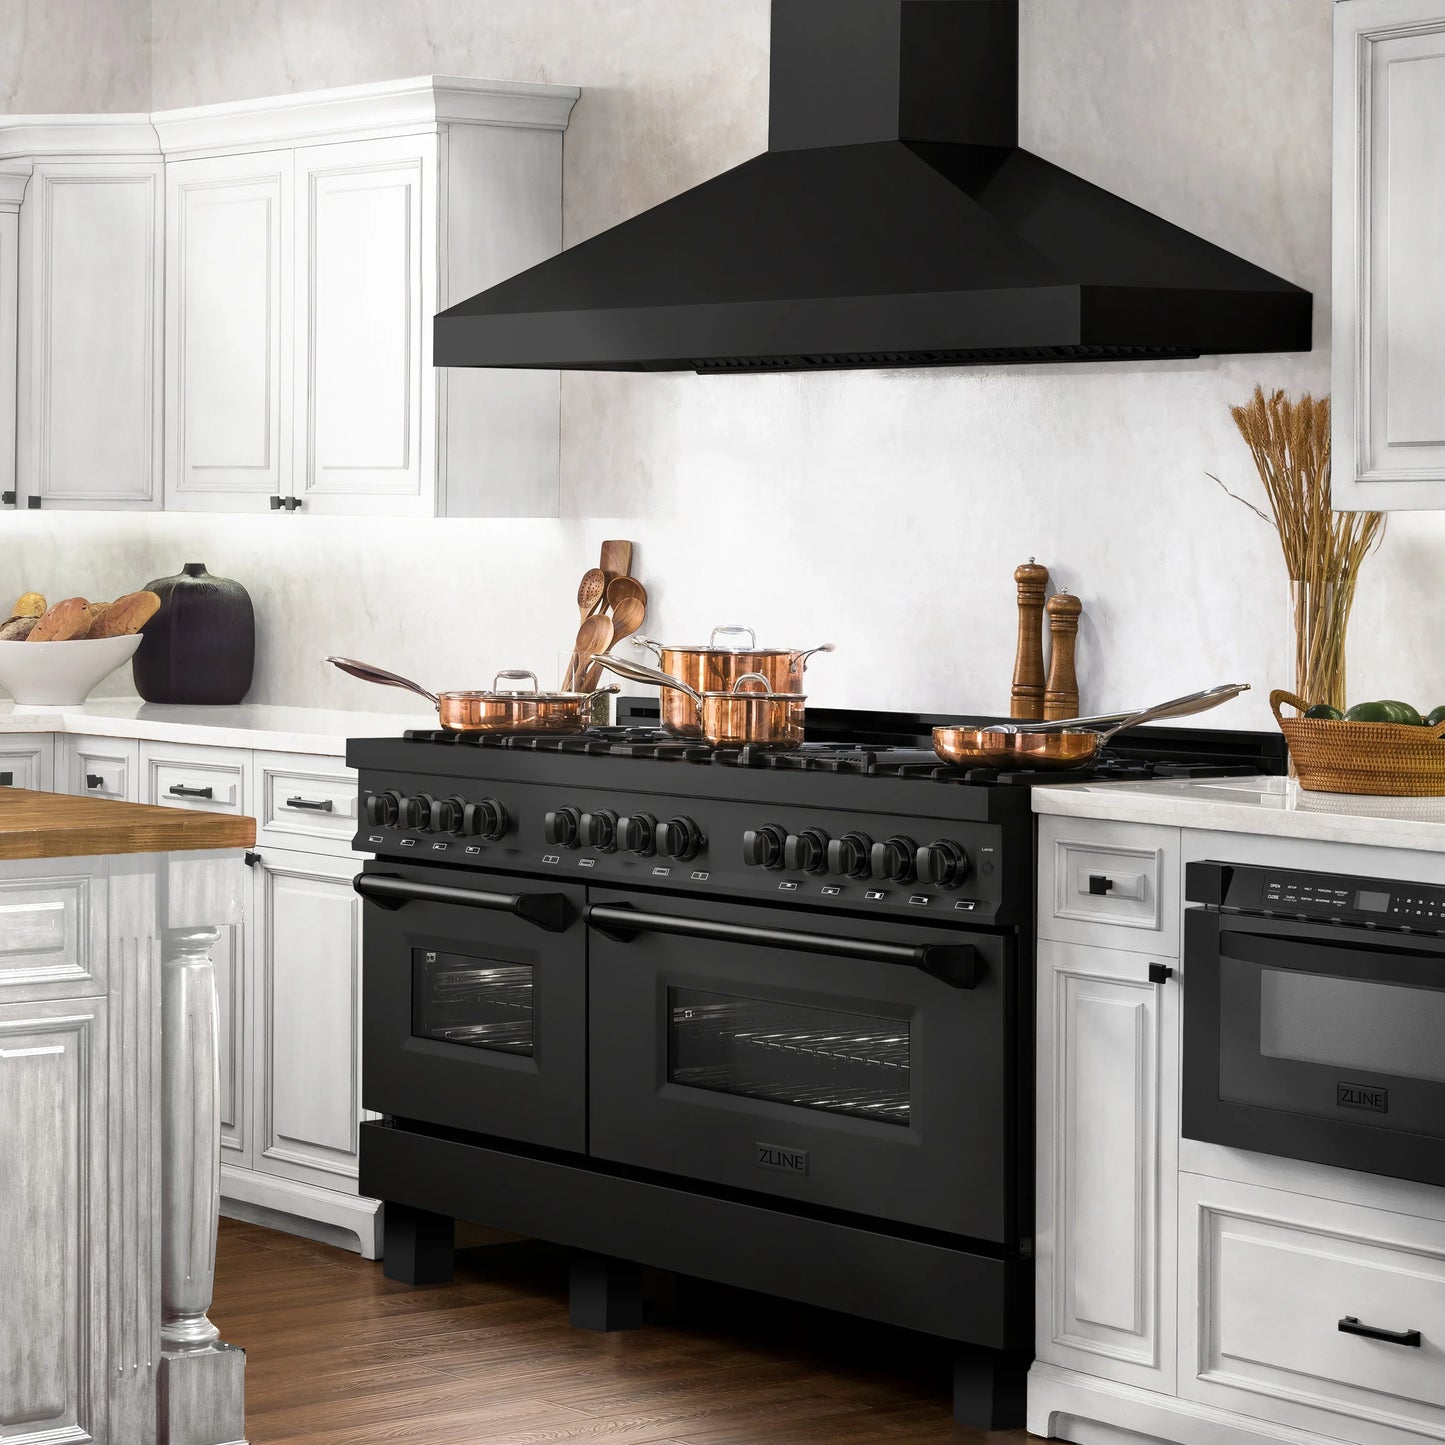 ZLINE 60" Dual Fuel Range with Gas Stove and Electric Oven in Black Stainless Steel with Brass Burners (RAB-60)